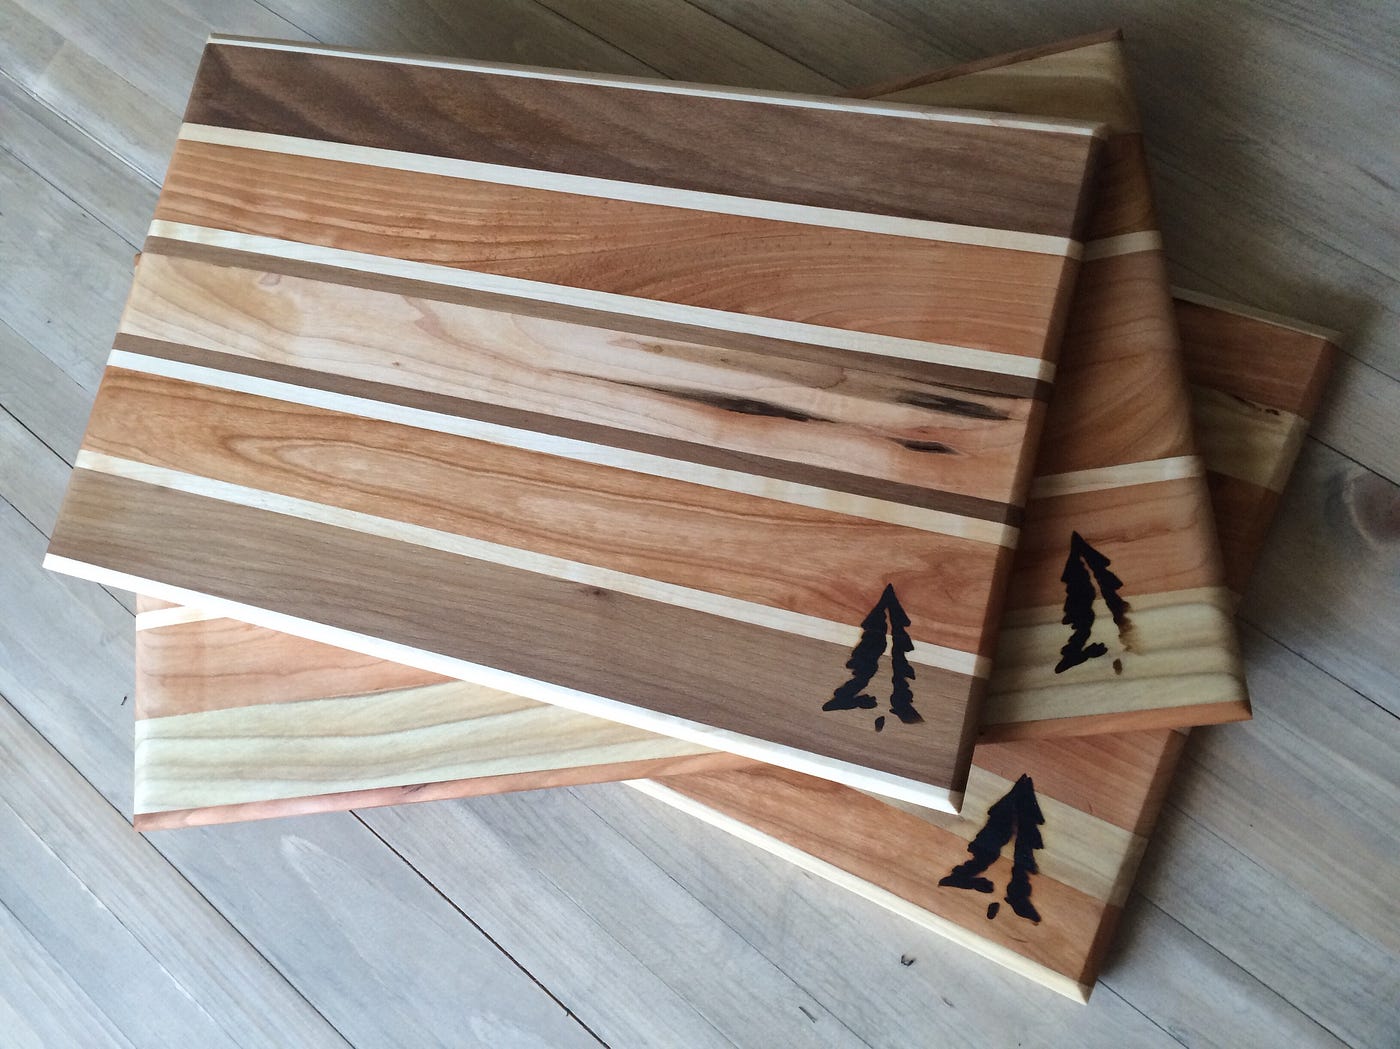 Quick Tips on Making a Cutting Board | by Remarkable Woodworks | Medium